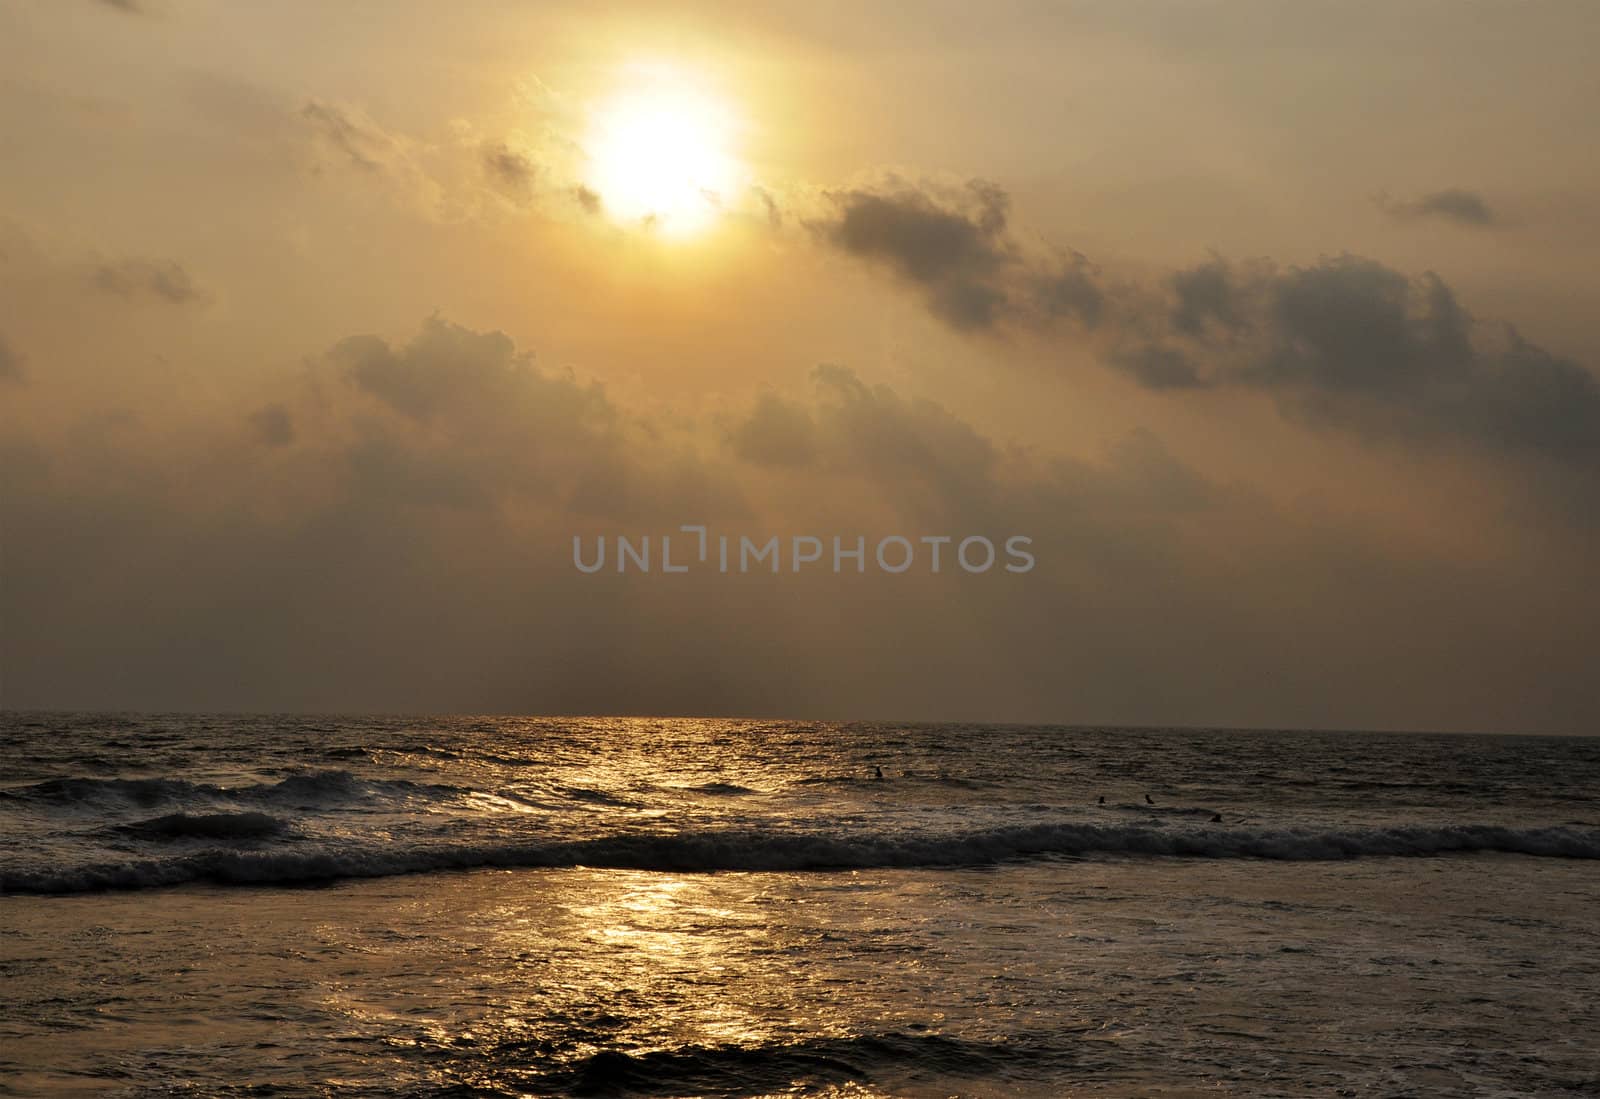 Sunset at the ocean in Sri Lanka by kdreams02